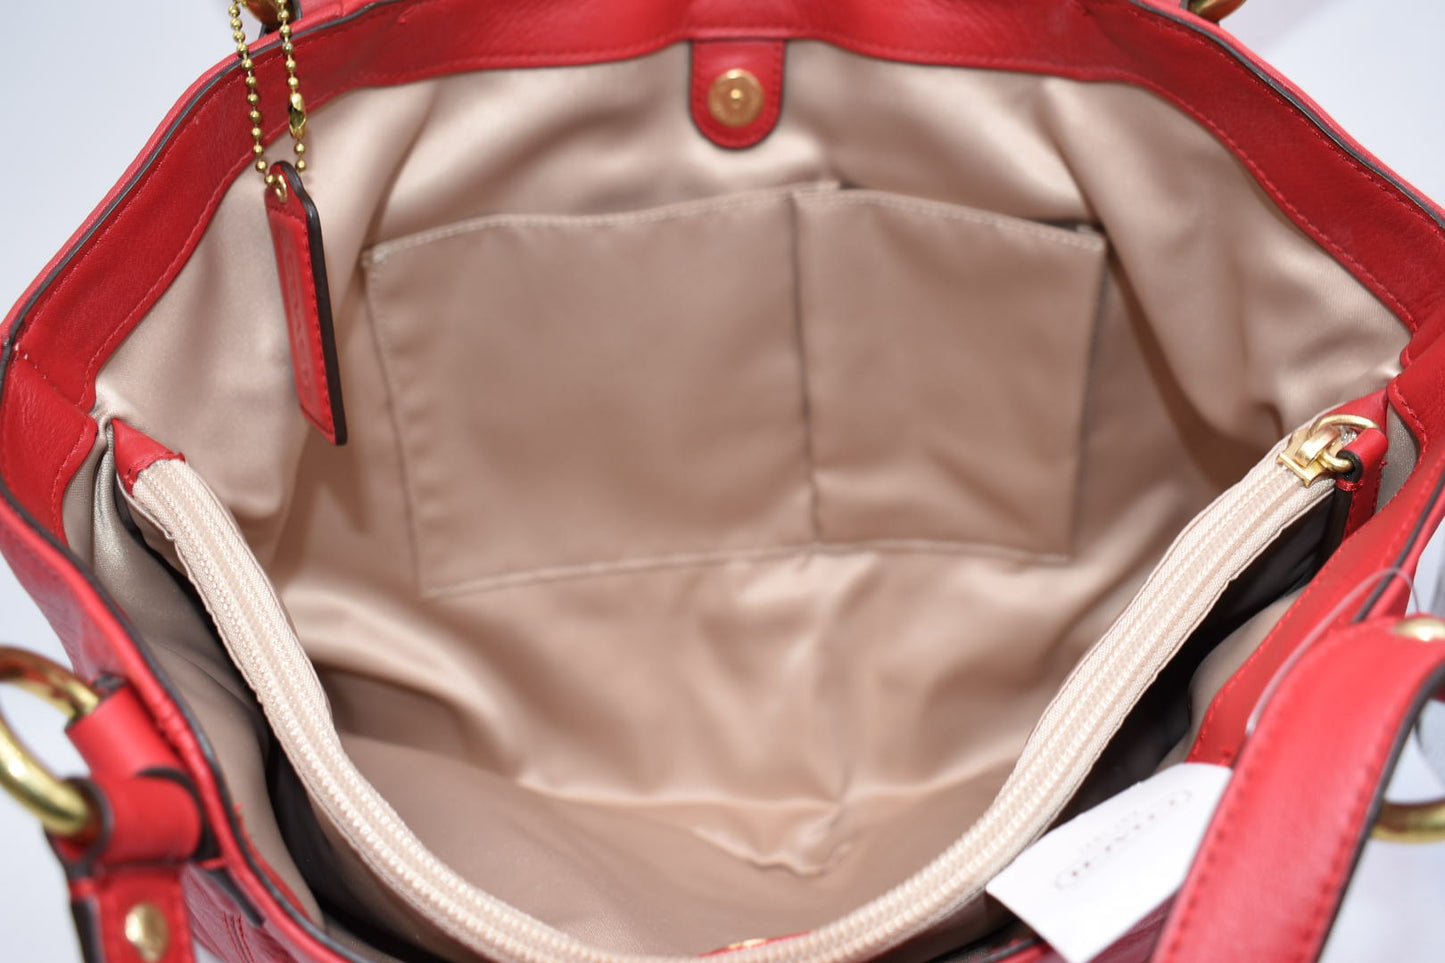 Coach Campbell Carryall Large Satchel Bag in Red